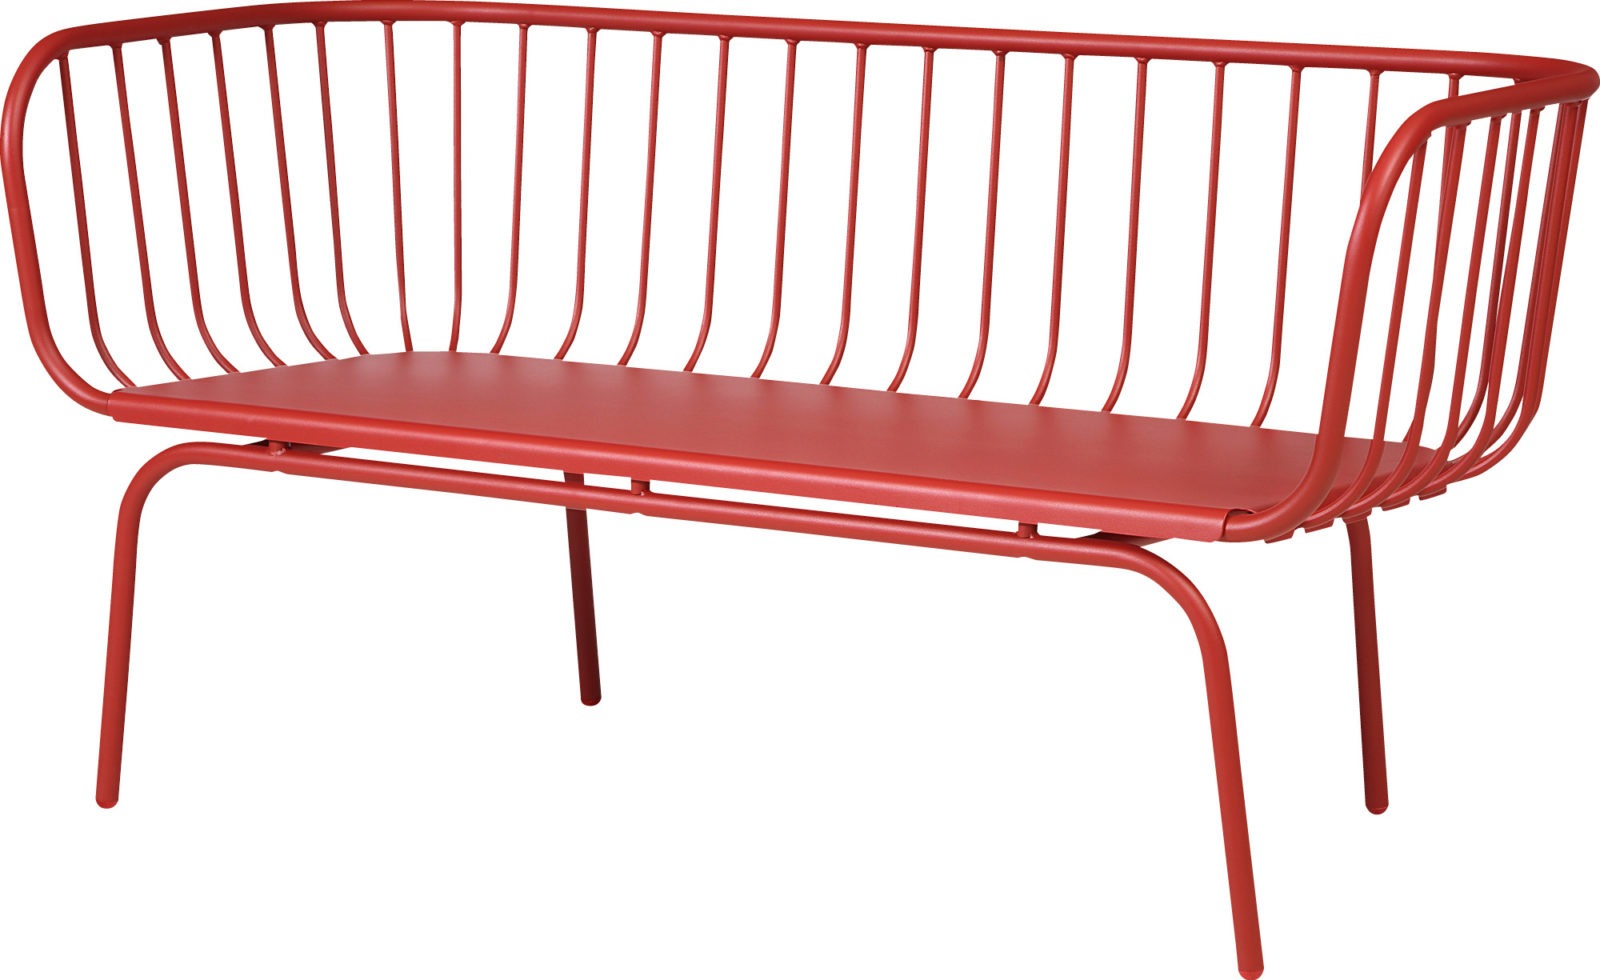 Red outdoor sofa made of powder-coated steel in clean lines, BRUSEN.